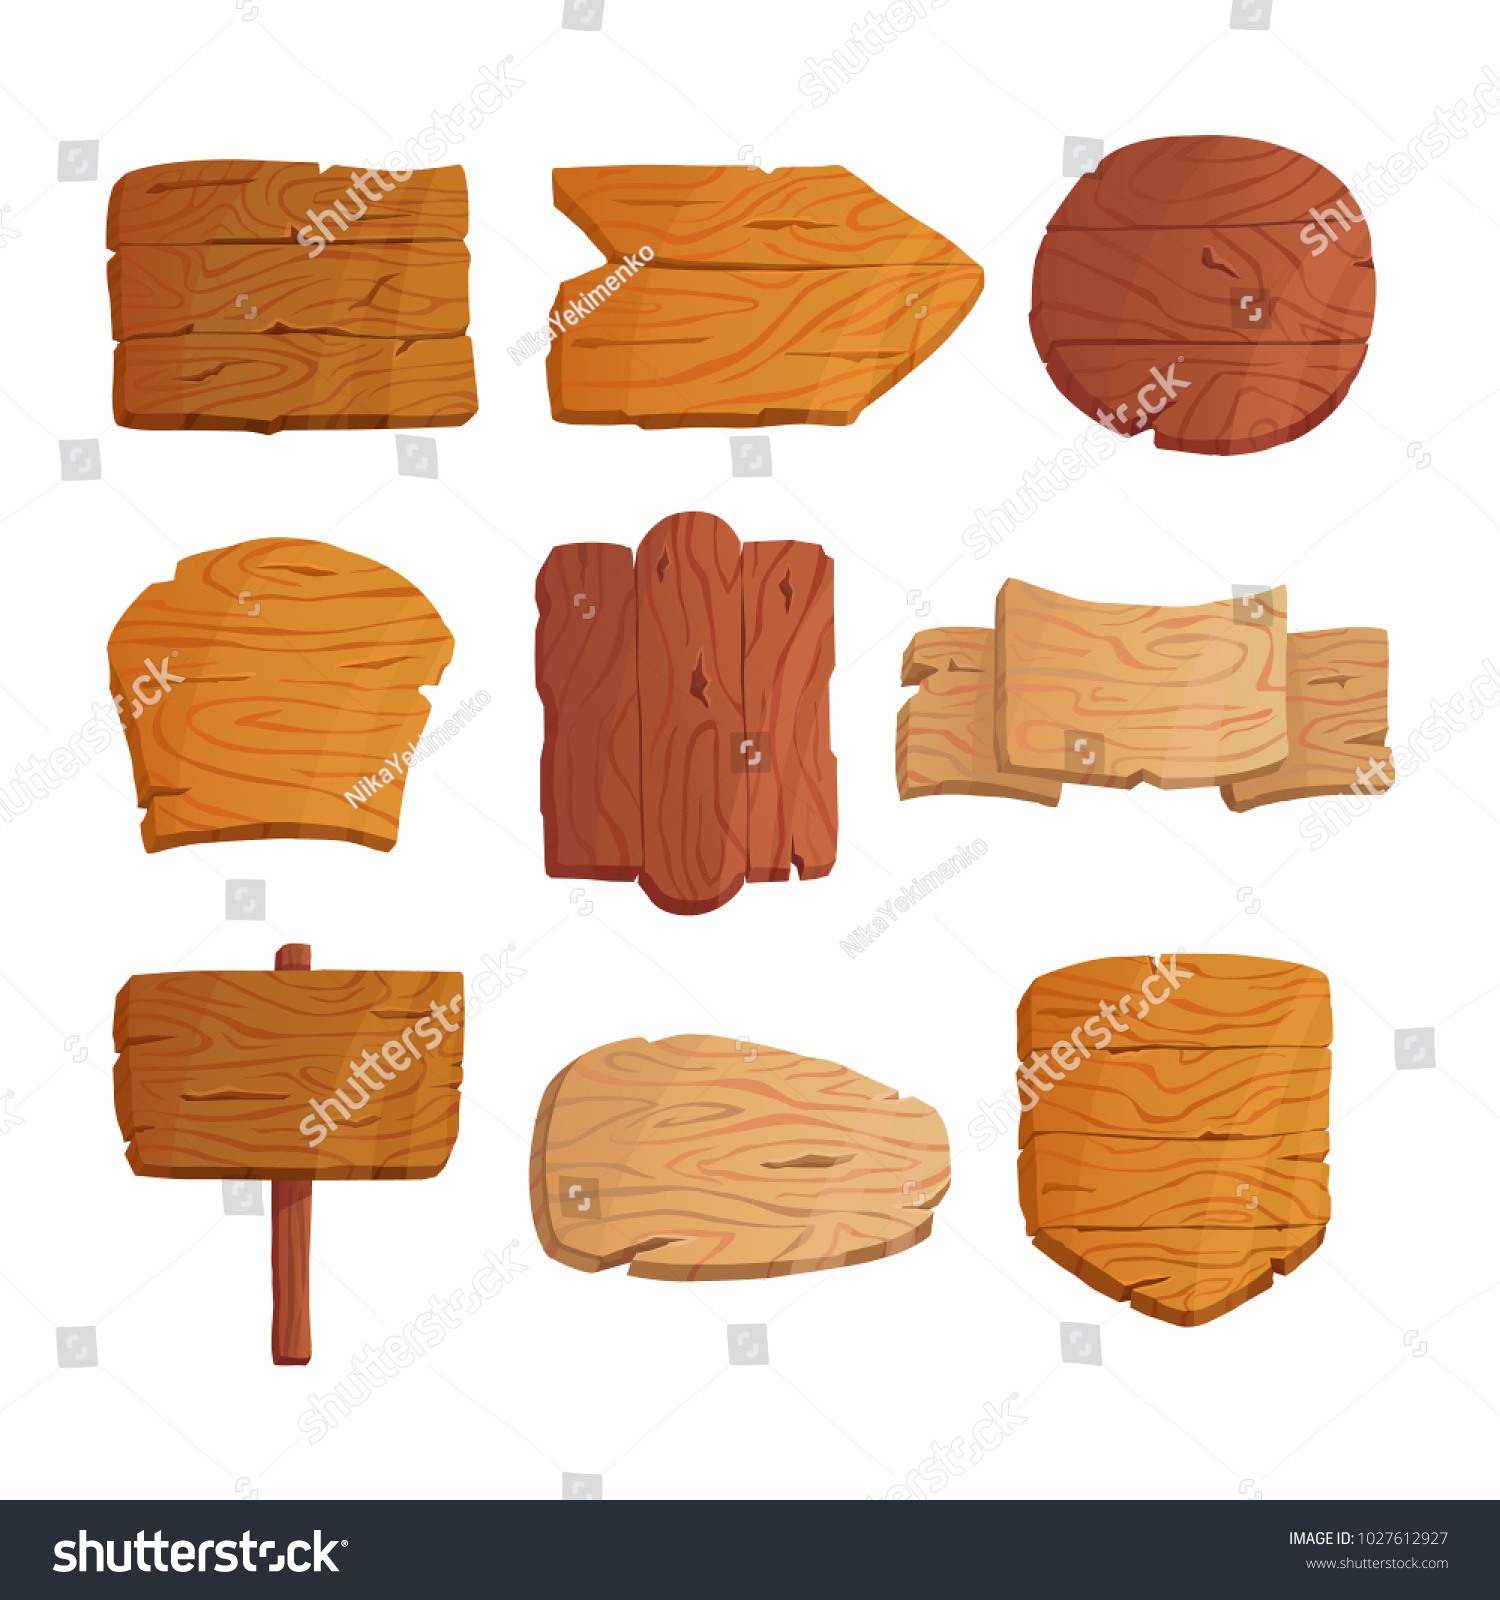 Cartoon wooden planks,wooden blank, banners and ribbons. Western wooden sings vector set. Vintage or old sings. Banners for messages or pointers for path finding. #1027612927